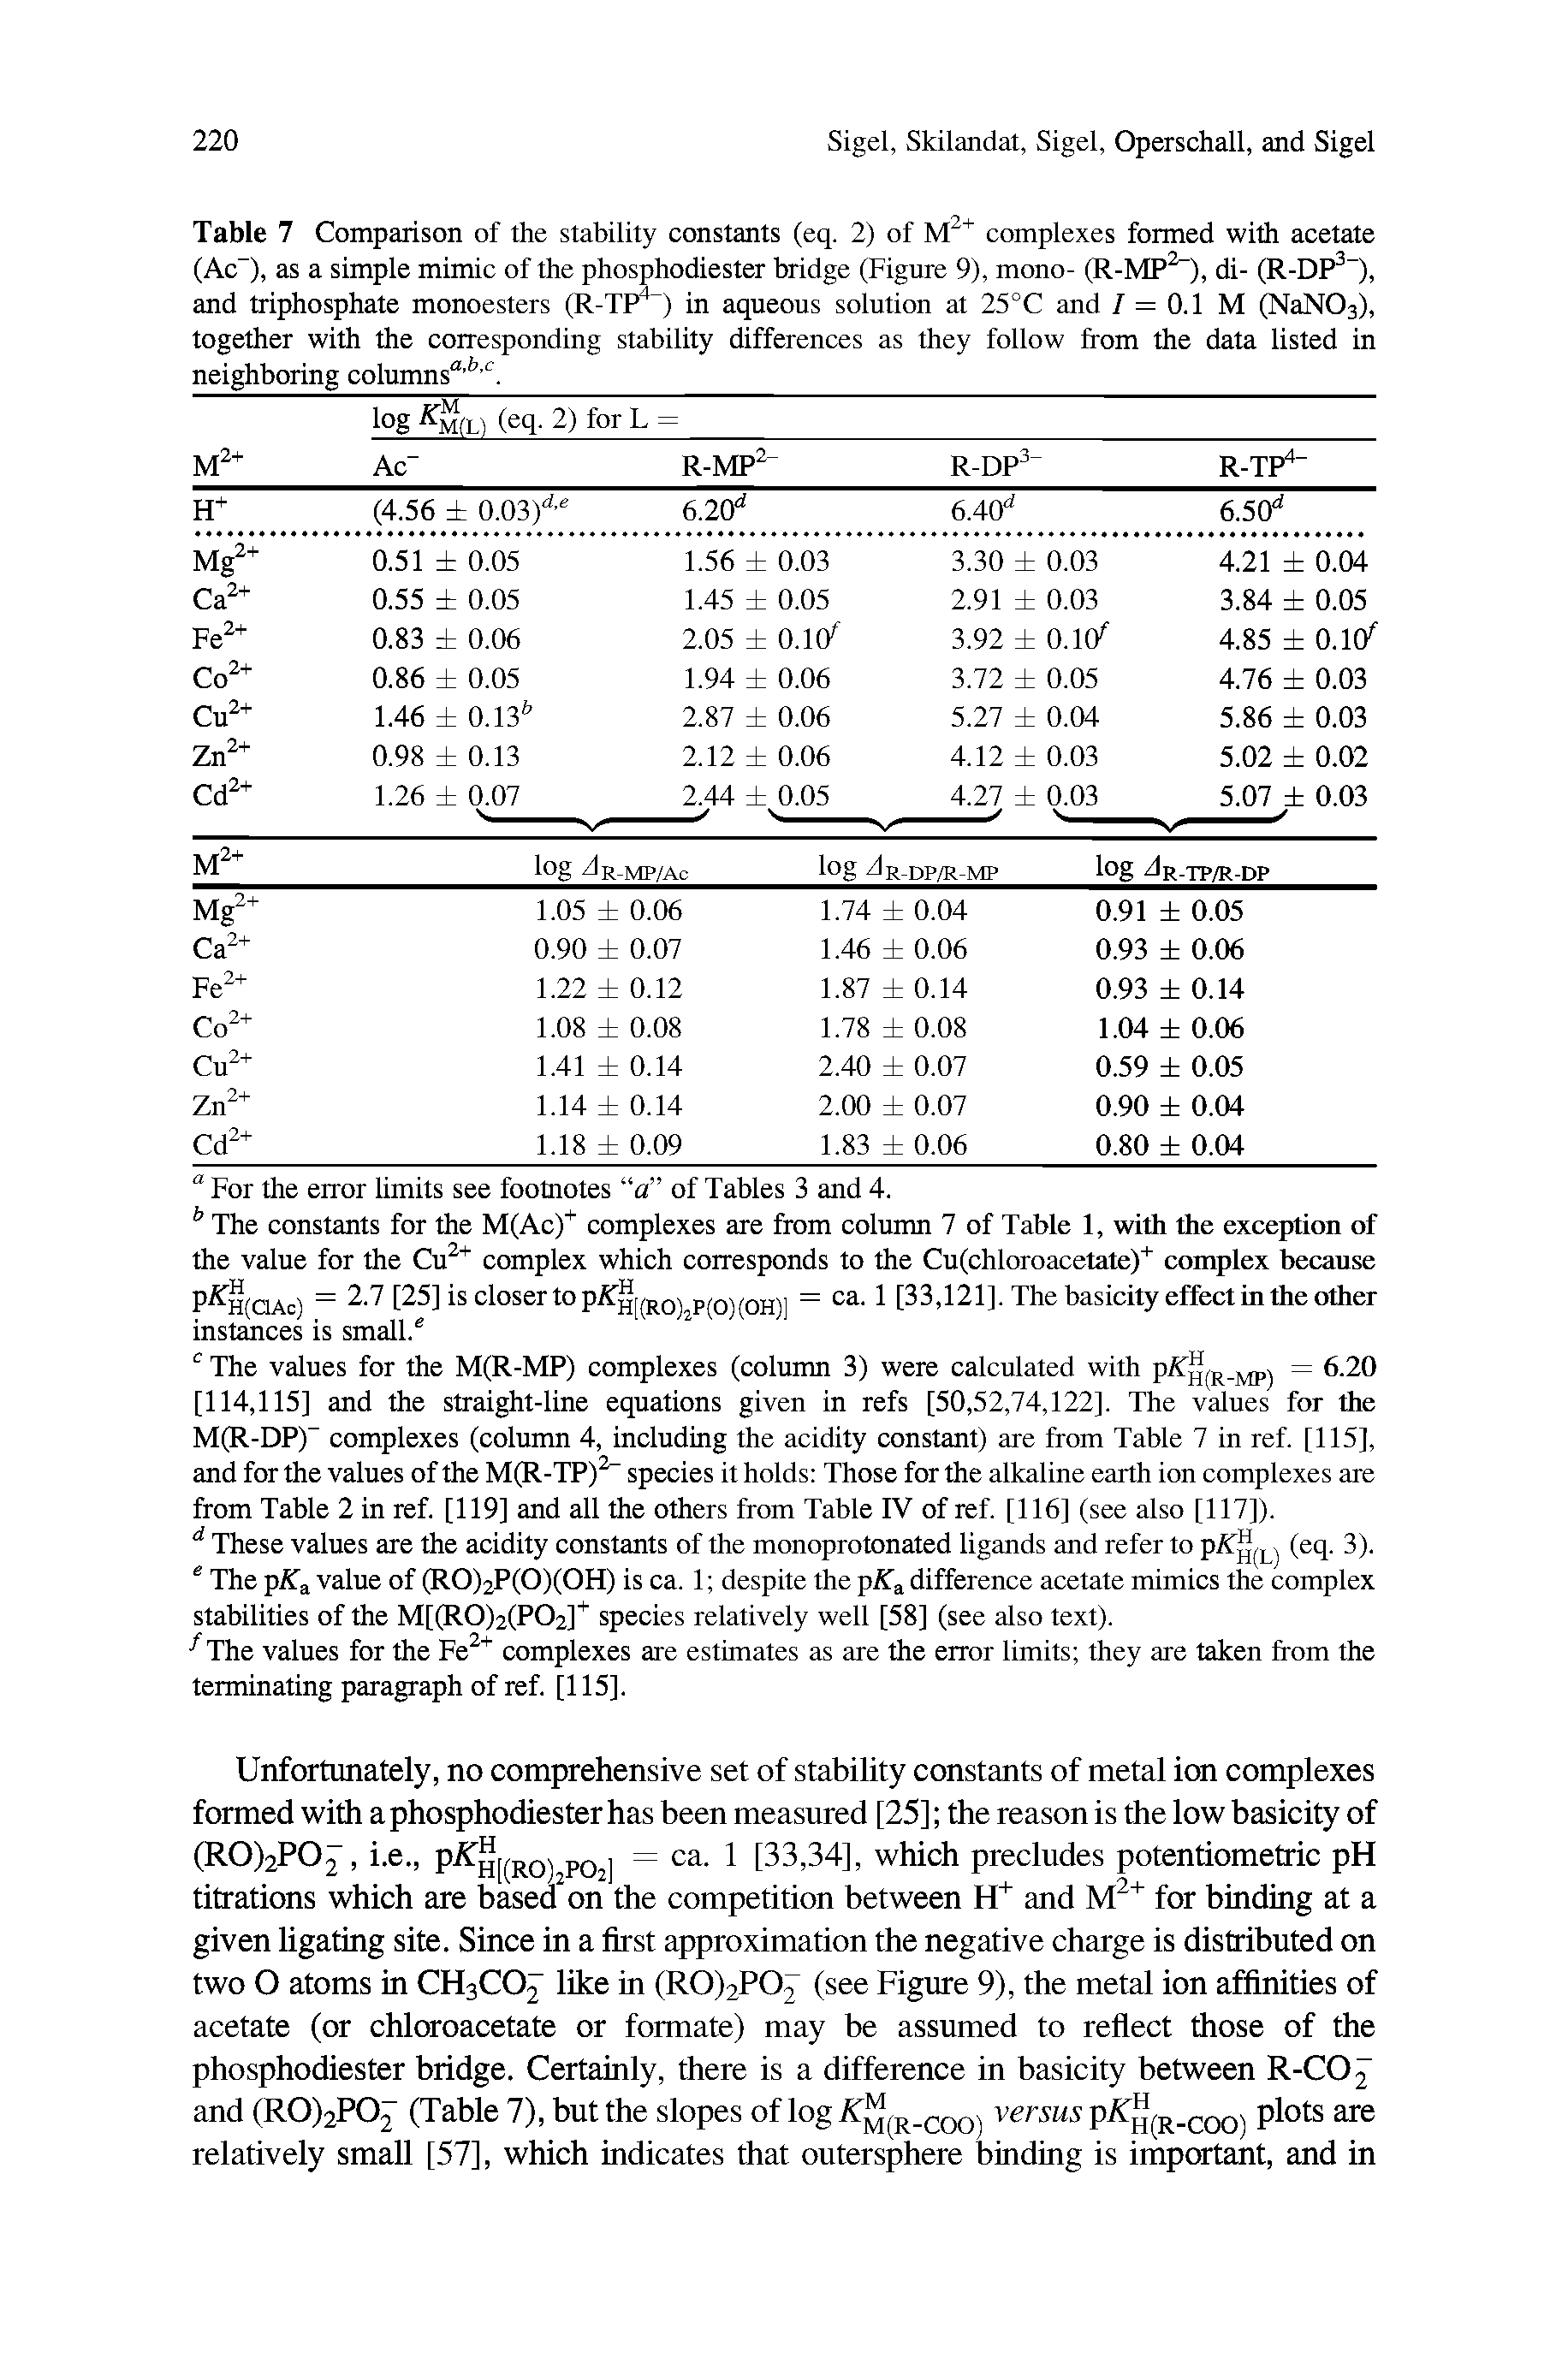 Table 7 Comparison of the stability constants (eq. 2) of complexes formed with acetate (Ac ), as a simple mimic of the phosphodiester bridge (Figure 9), mono- (R-MP ), di- (R-DP ), and triphosphate monoesters (R-TP ) in aqueous solution at 25°C and 7 = 0.1 M (NaNOs), together with the corresponding stability differences as they follow from the data listed in neighboring columns" ...